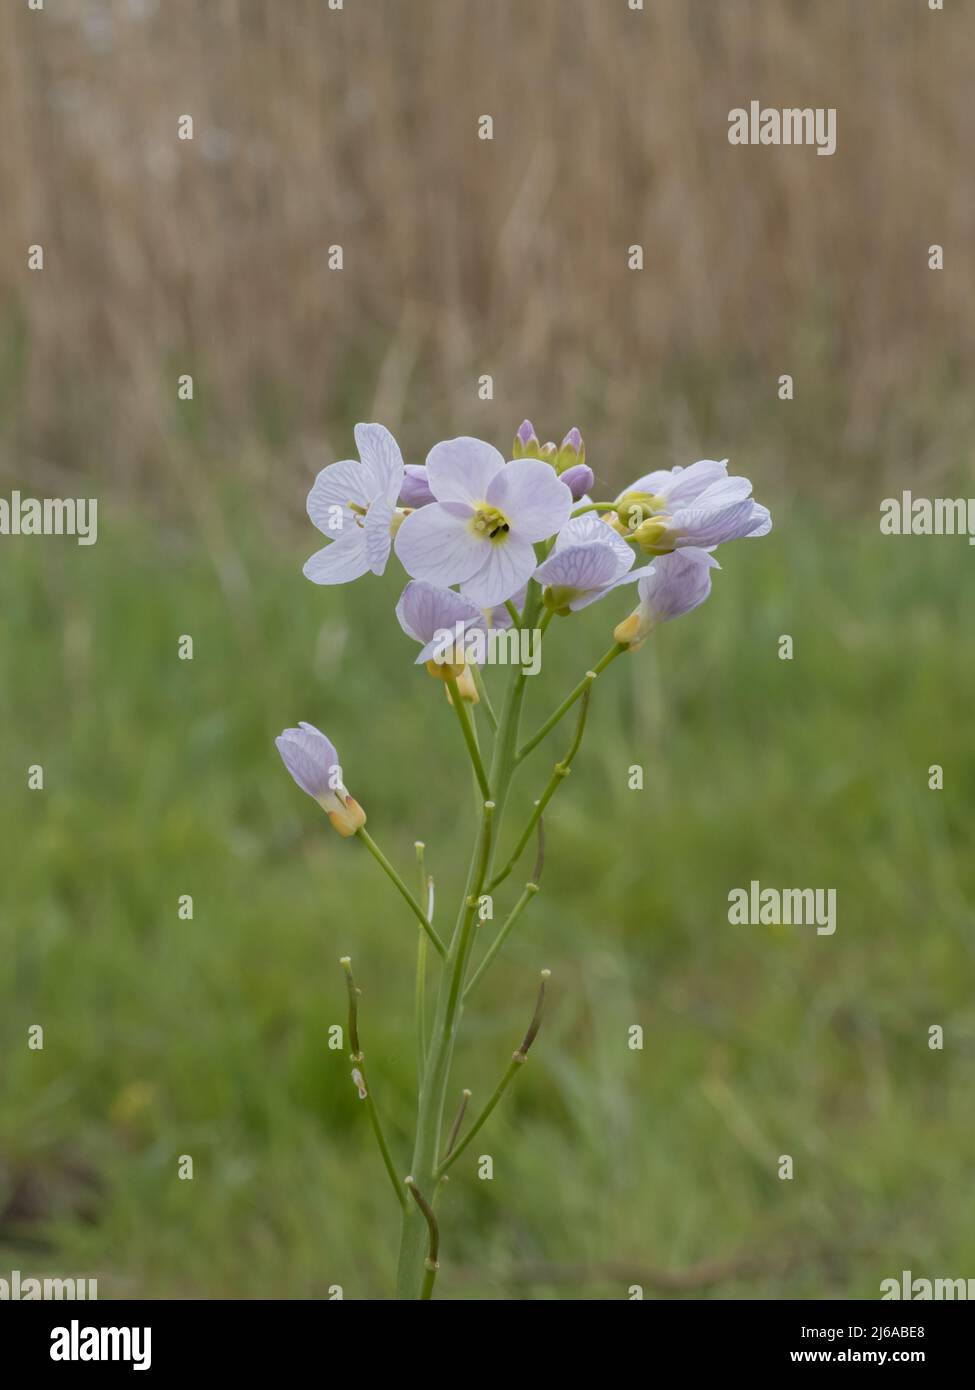 Cardamine pratensis, the cuckoo flower, also known as lady's smock, mayflower, or milkmaids. Stock Photo